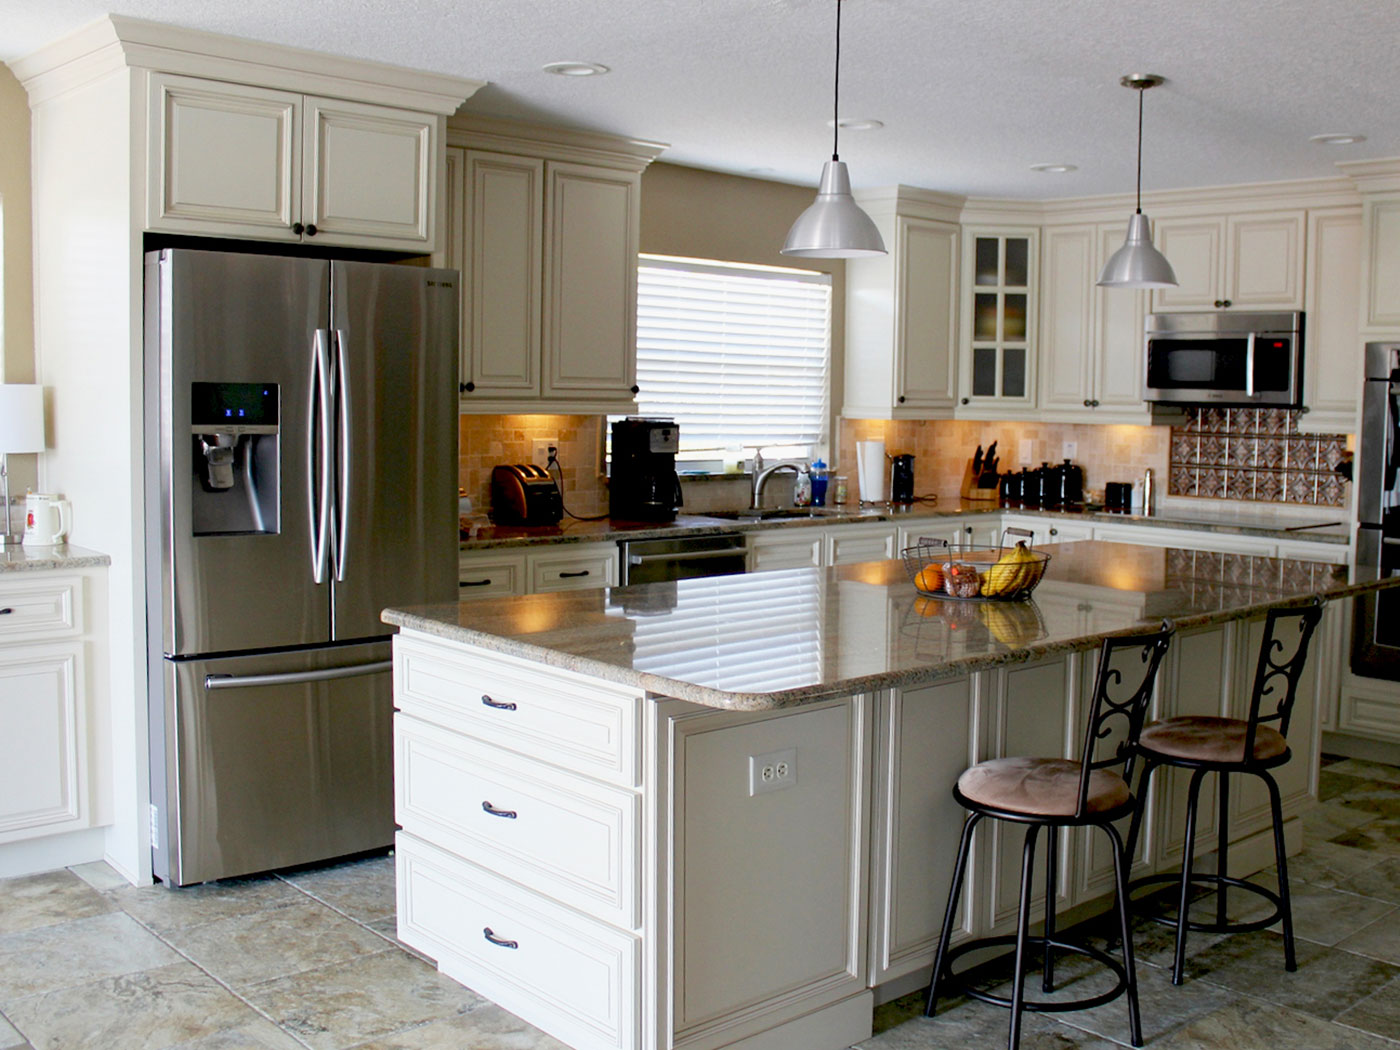 Thank You for Contacting Craftworks Custom Cabinetry - Craftworks Custom Cabinetry - Rochester, NY